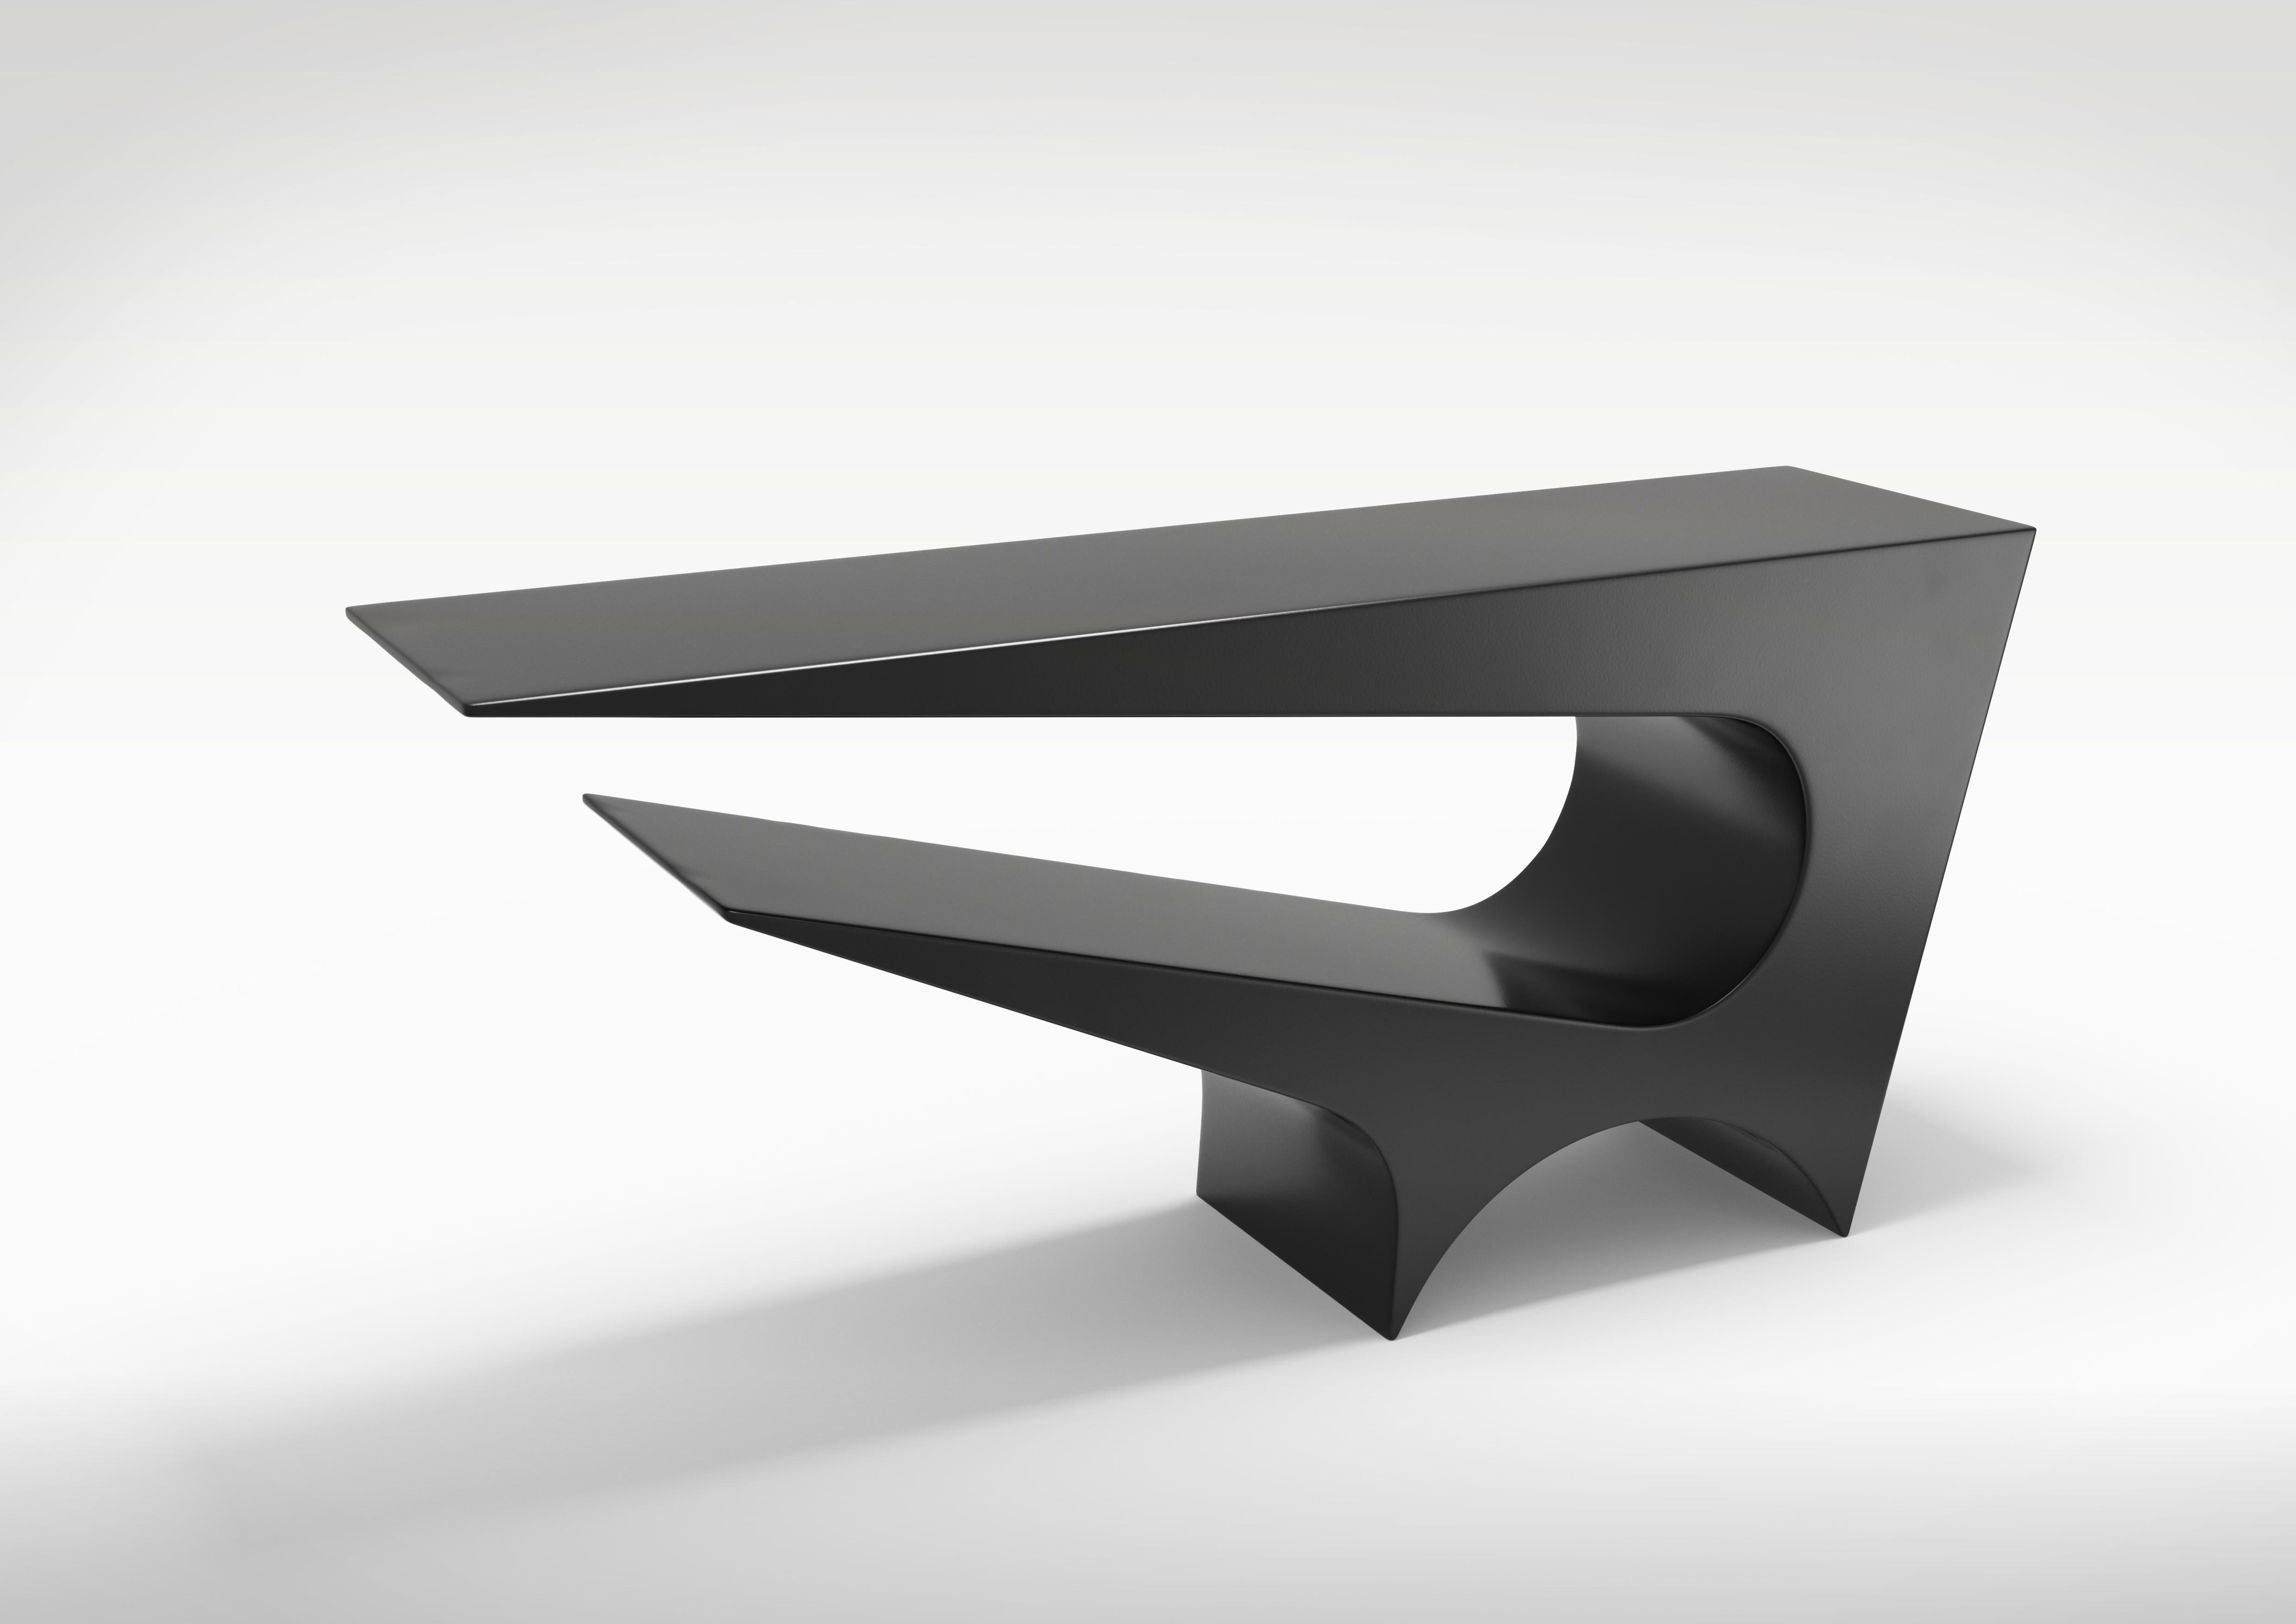 Star Axis Console Table in Black Matte Aluminum by Neal Aronowitz In New Condition For Sale In Portland, OR